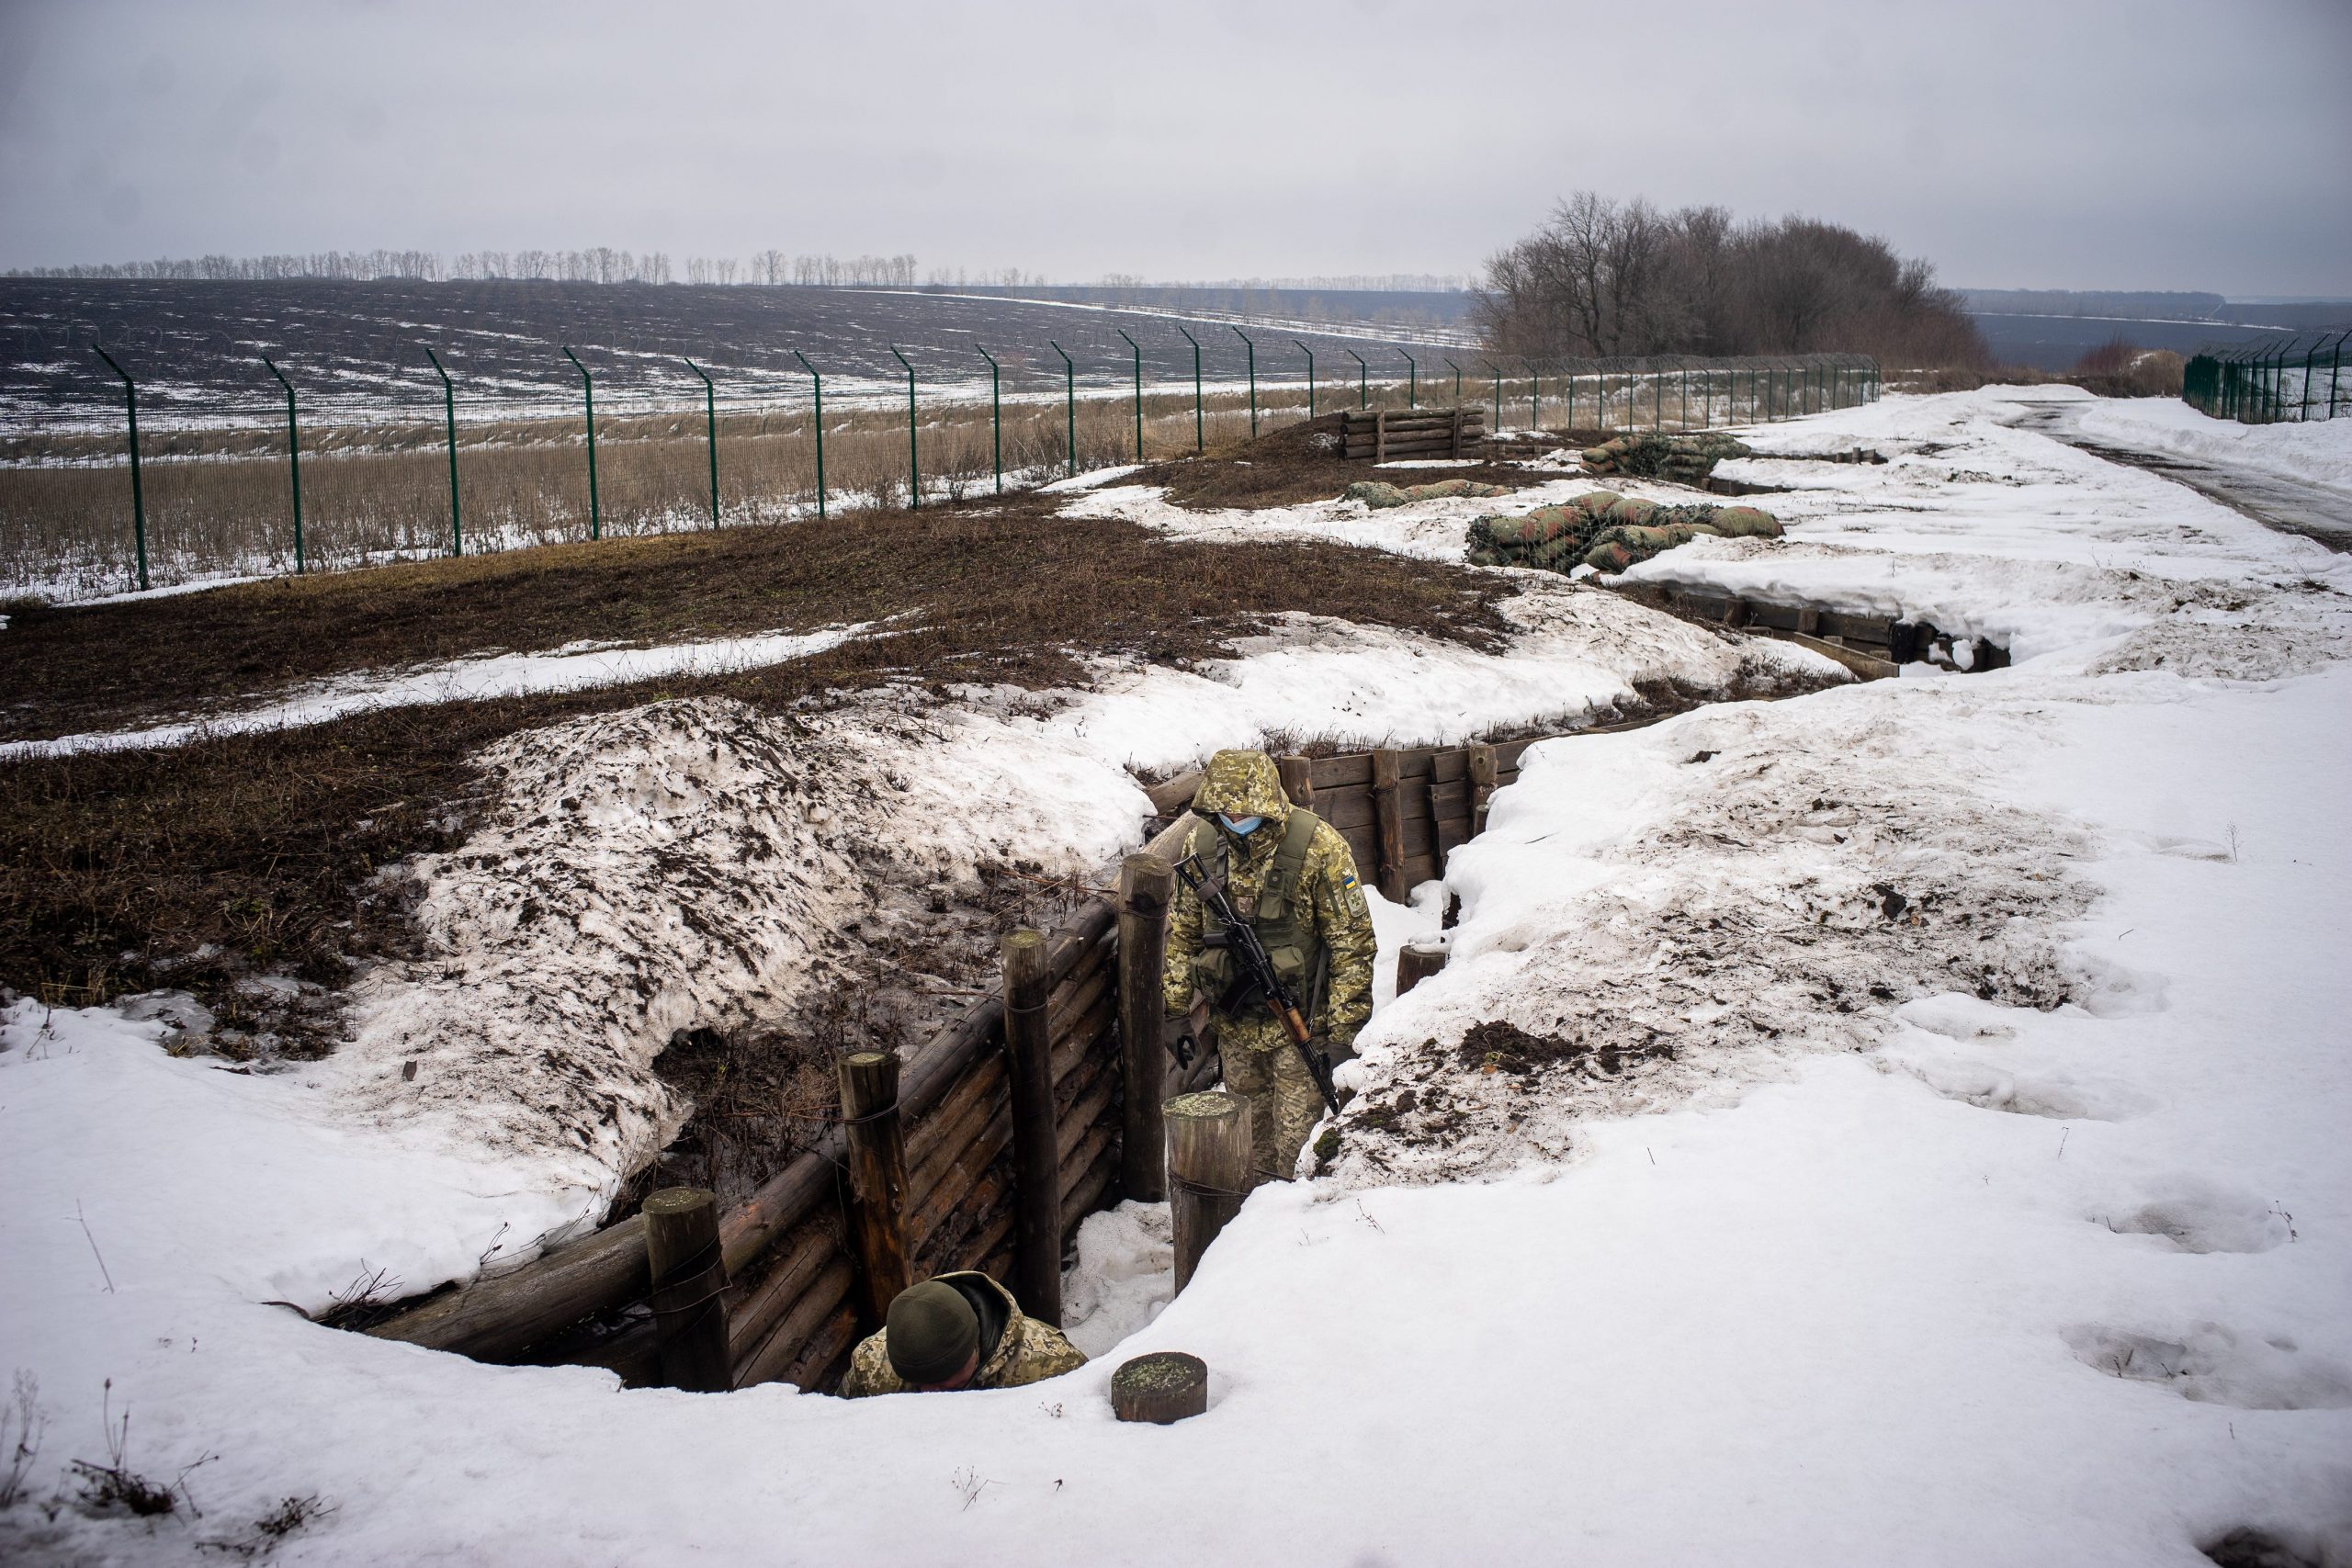 Trenches are seen in a desolate, snow-covered landscape near a long fence.